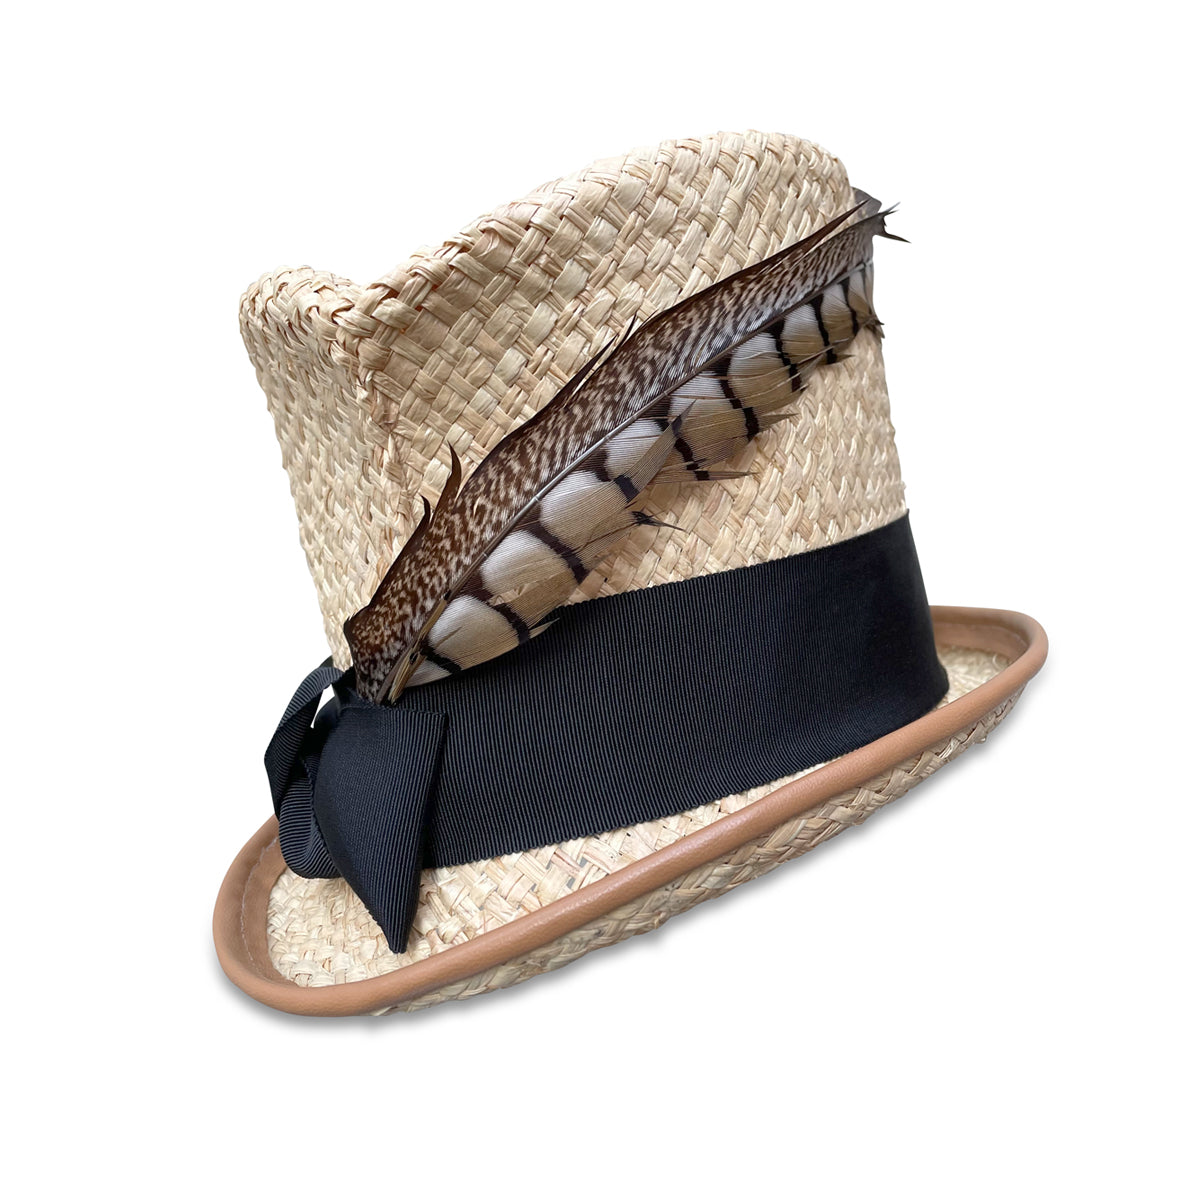 Handcrafted Straw Text Hat made in New York City